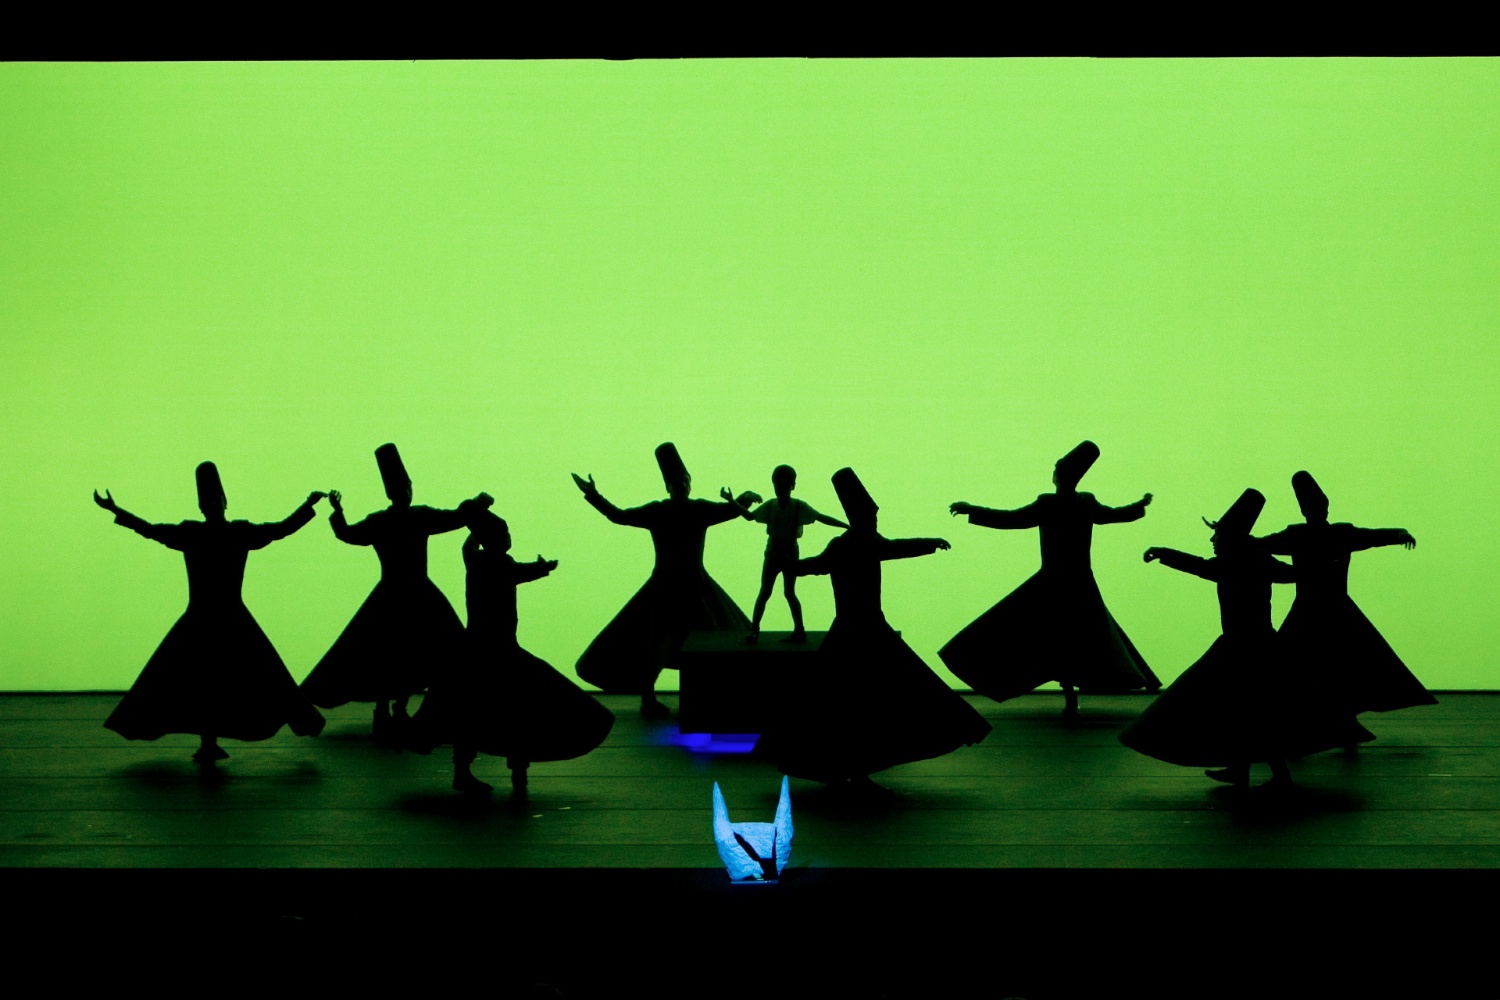  Rumi
In the Blink of the Eye
Pallas Theater, Athens, 2008
© photo by Luciano Romano
(photo courtesy of Change Performing Arts) 